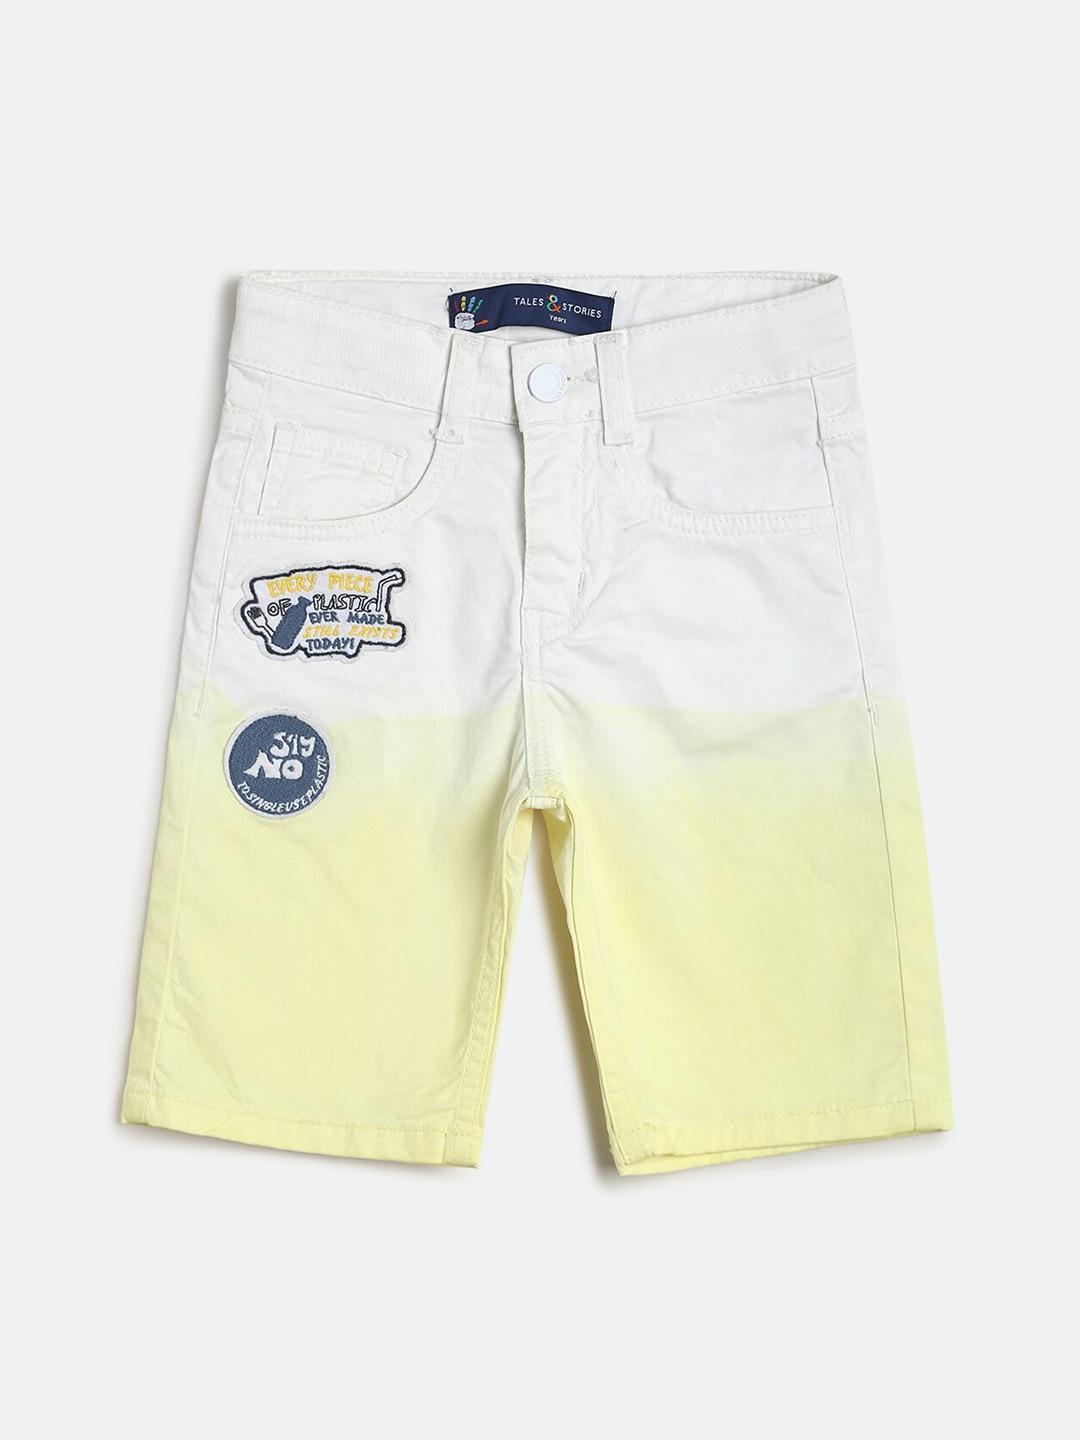 TALES & STORIES Boys Yellow Embroidered Regular Shorts